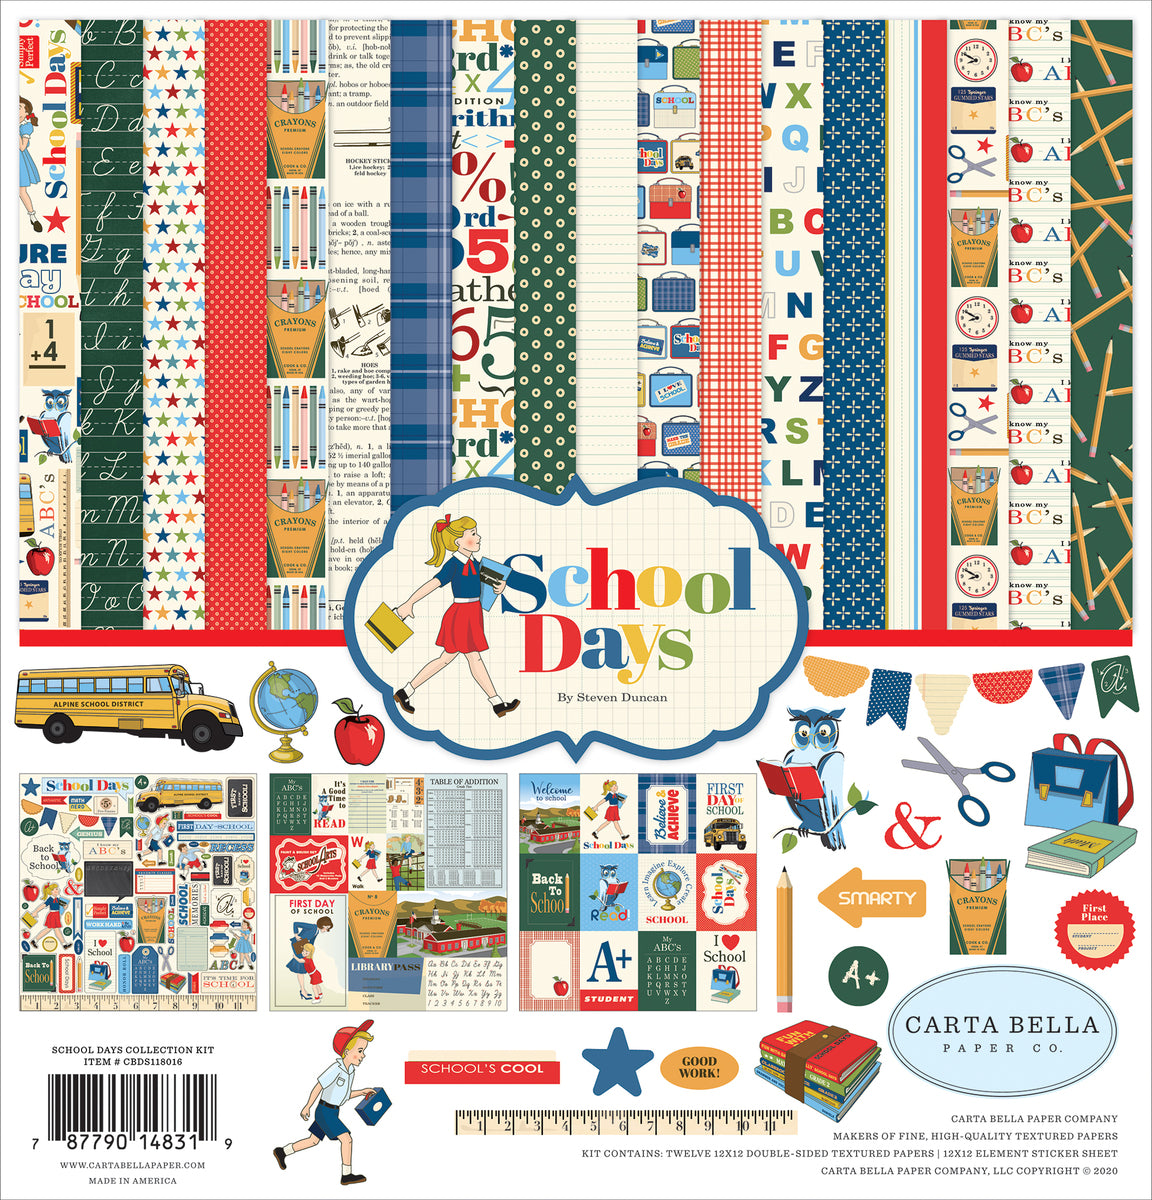 School Days - 12x12 collection kit from Carta Bella Paper